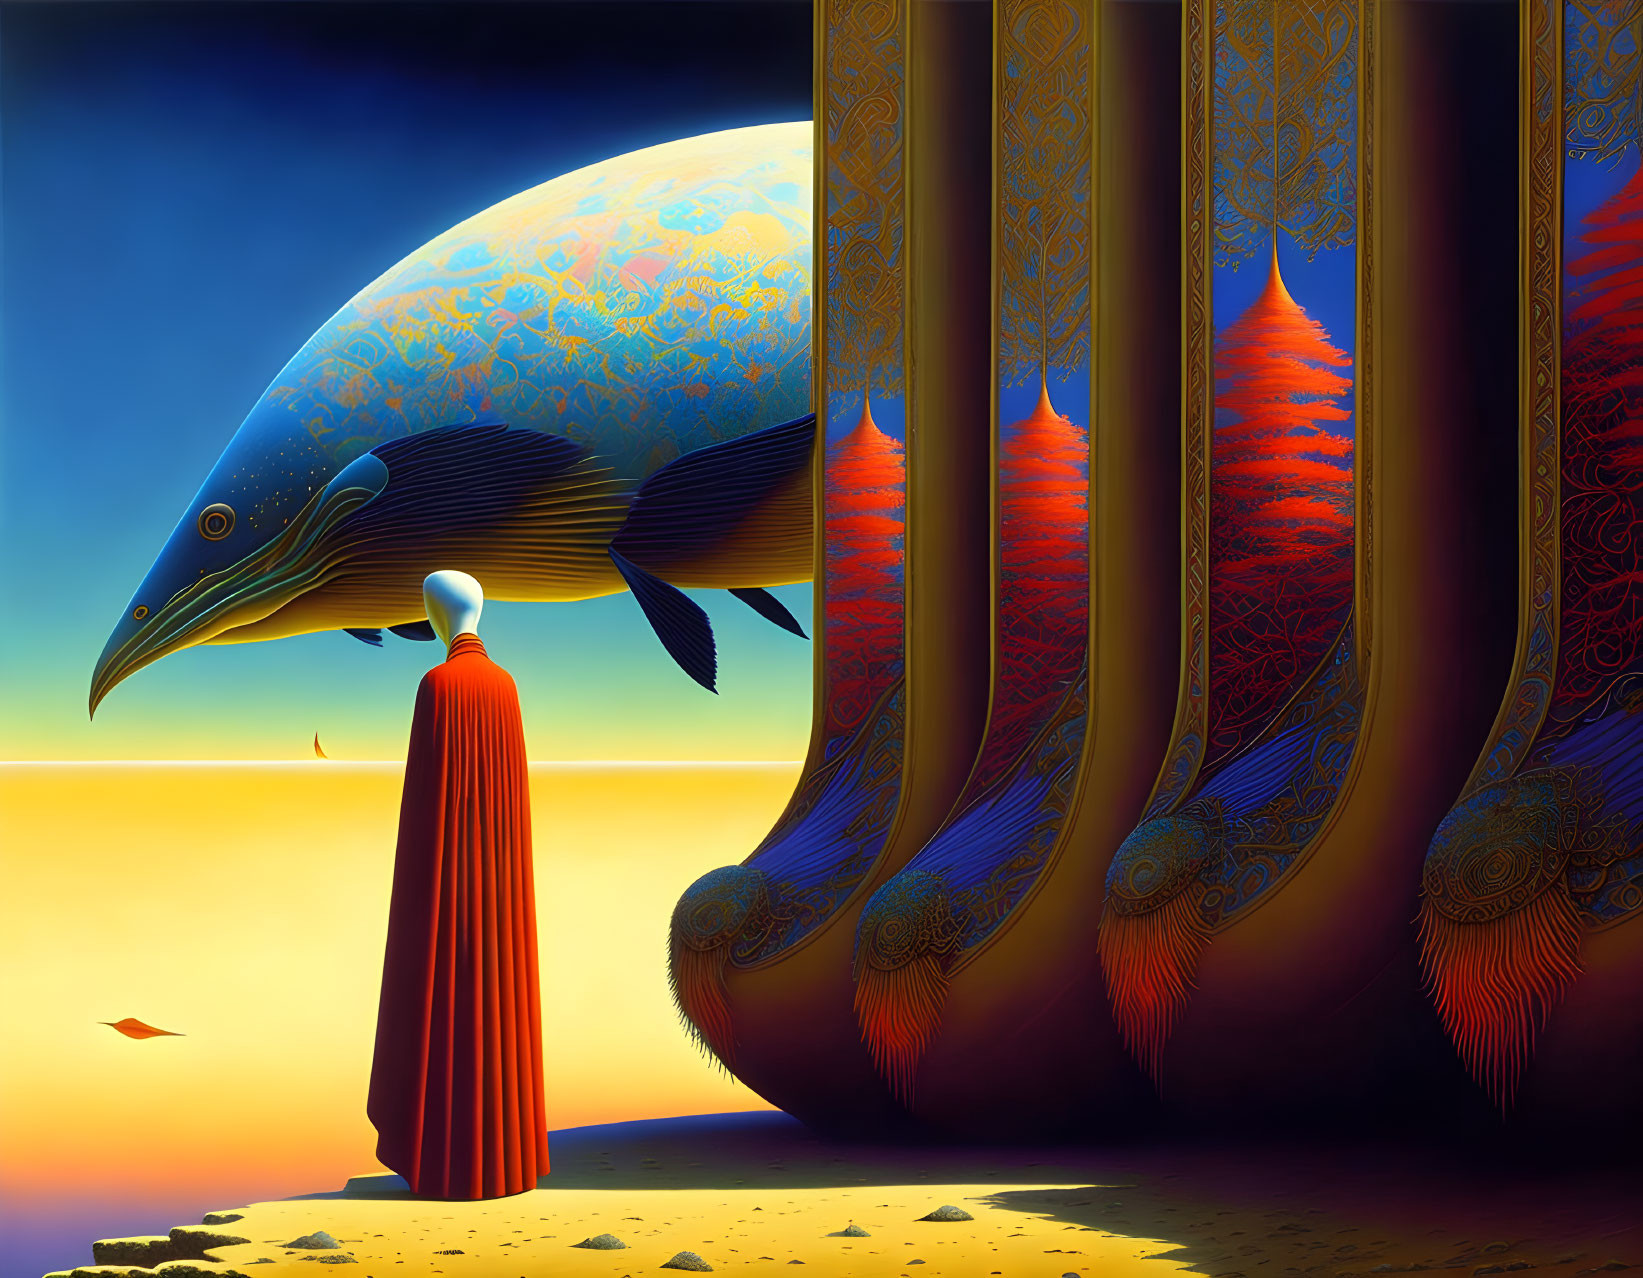 Surreal painting of figure in red cloak and giant blue fish in desert landscape